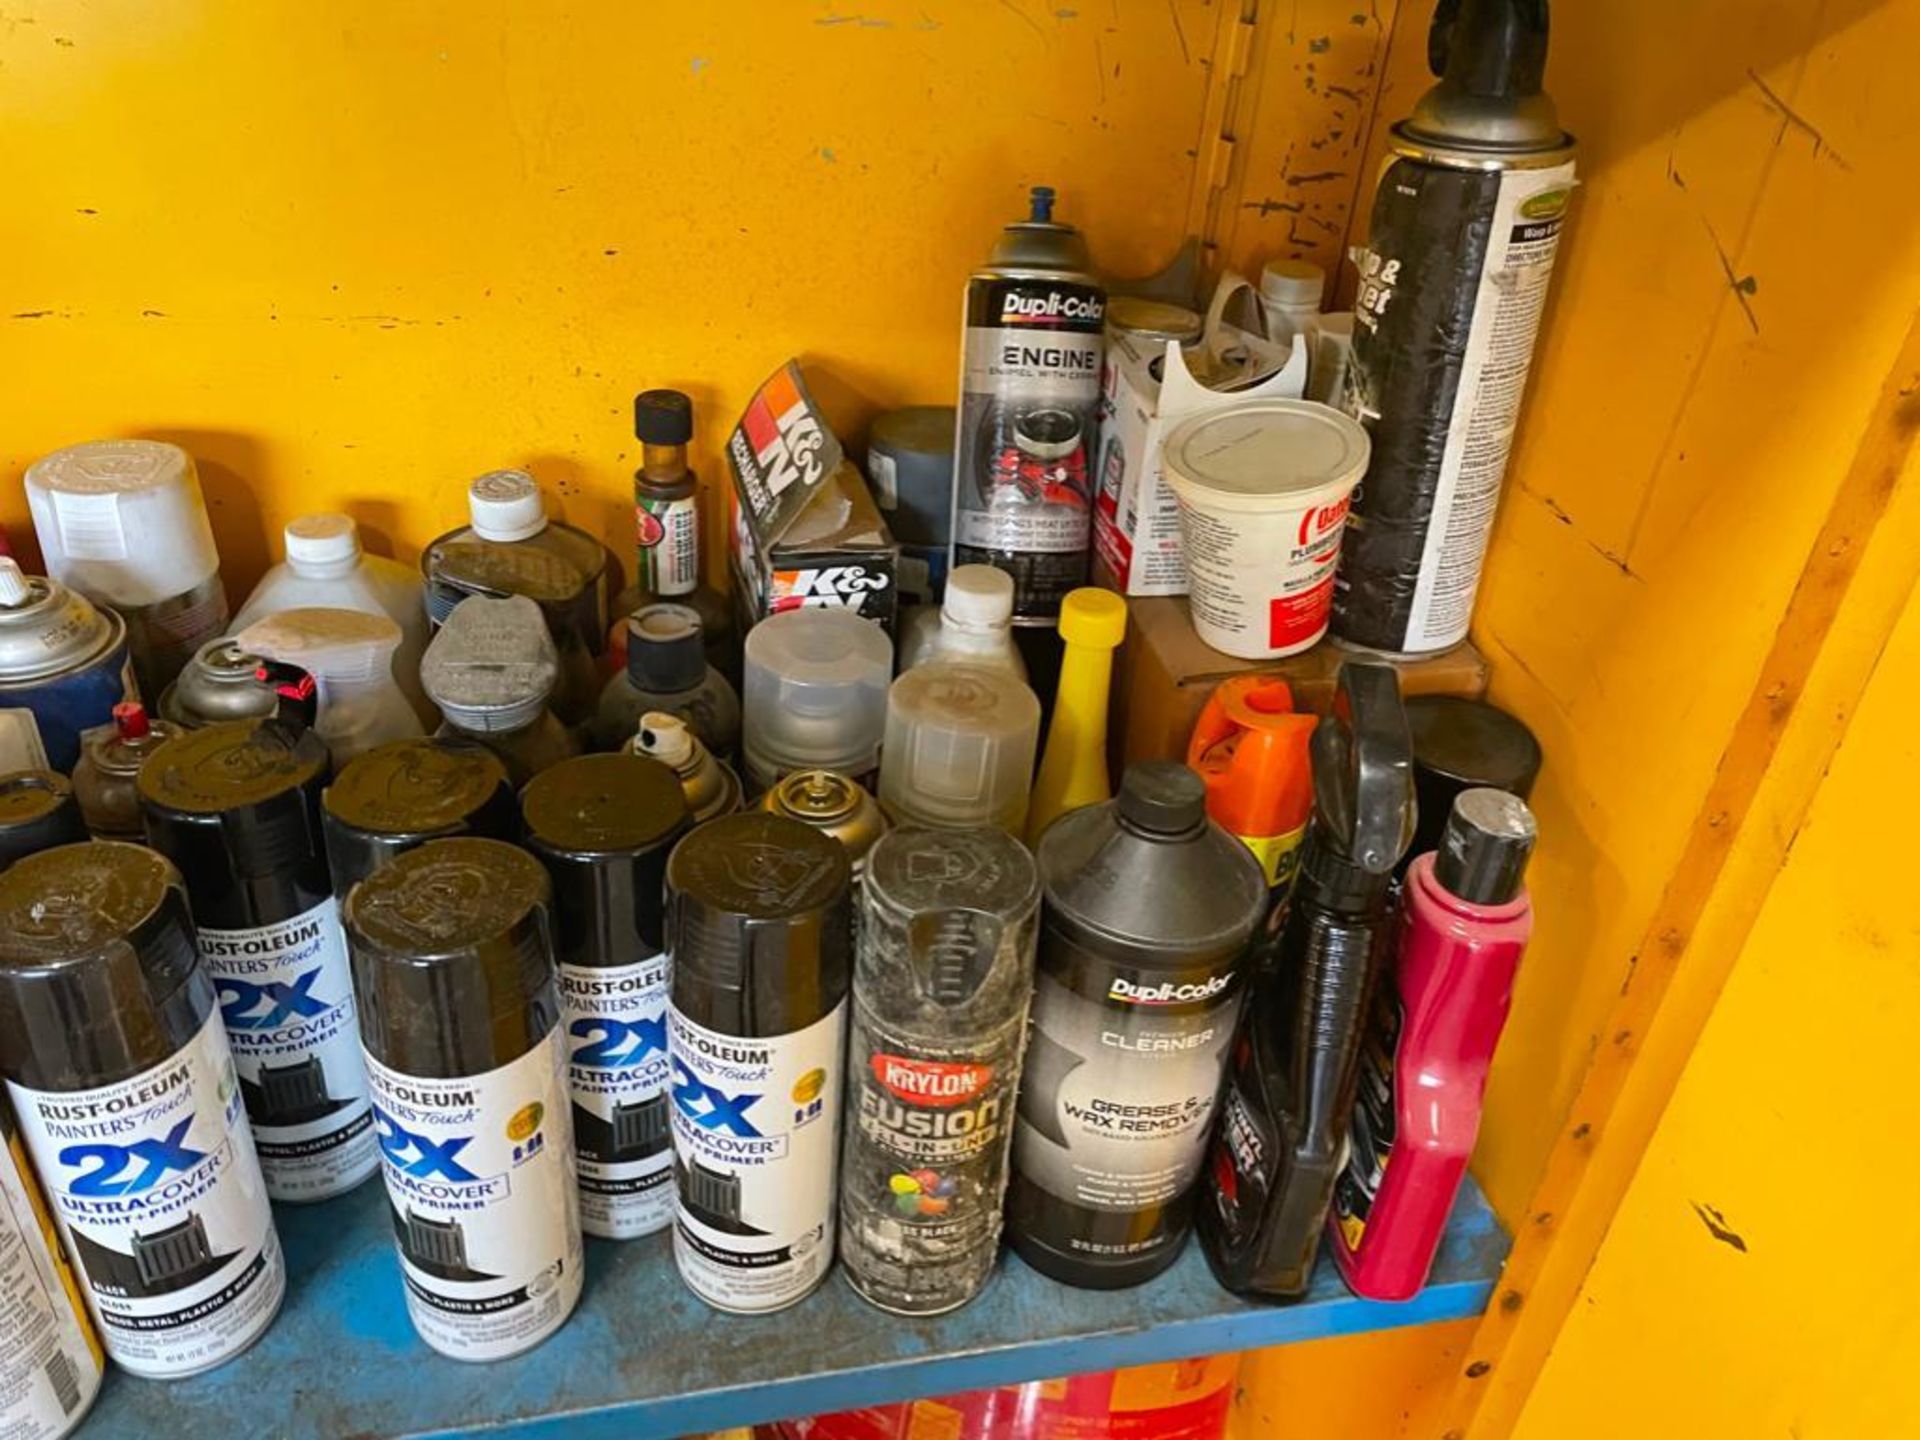 Miscellaneous Paint Supplies, Oils, Lubricants, Etc. Located in Hazelwood, MO - Image 5 of 7